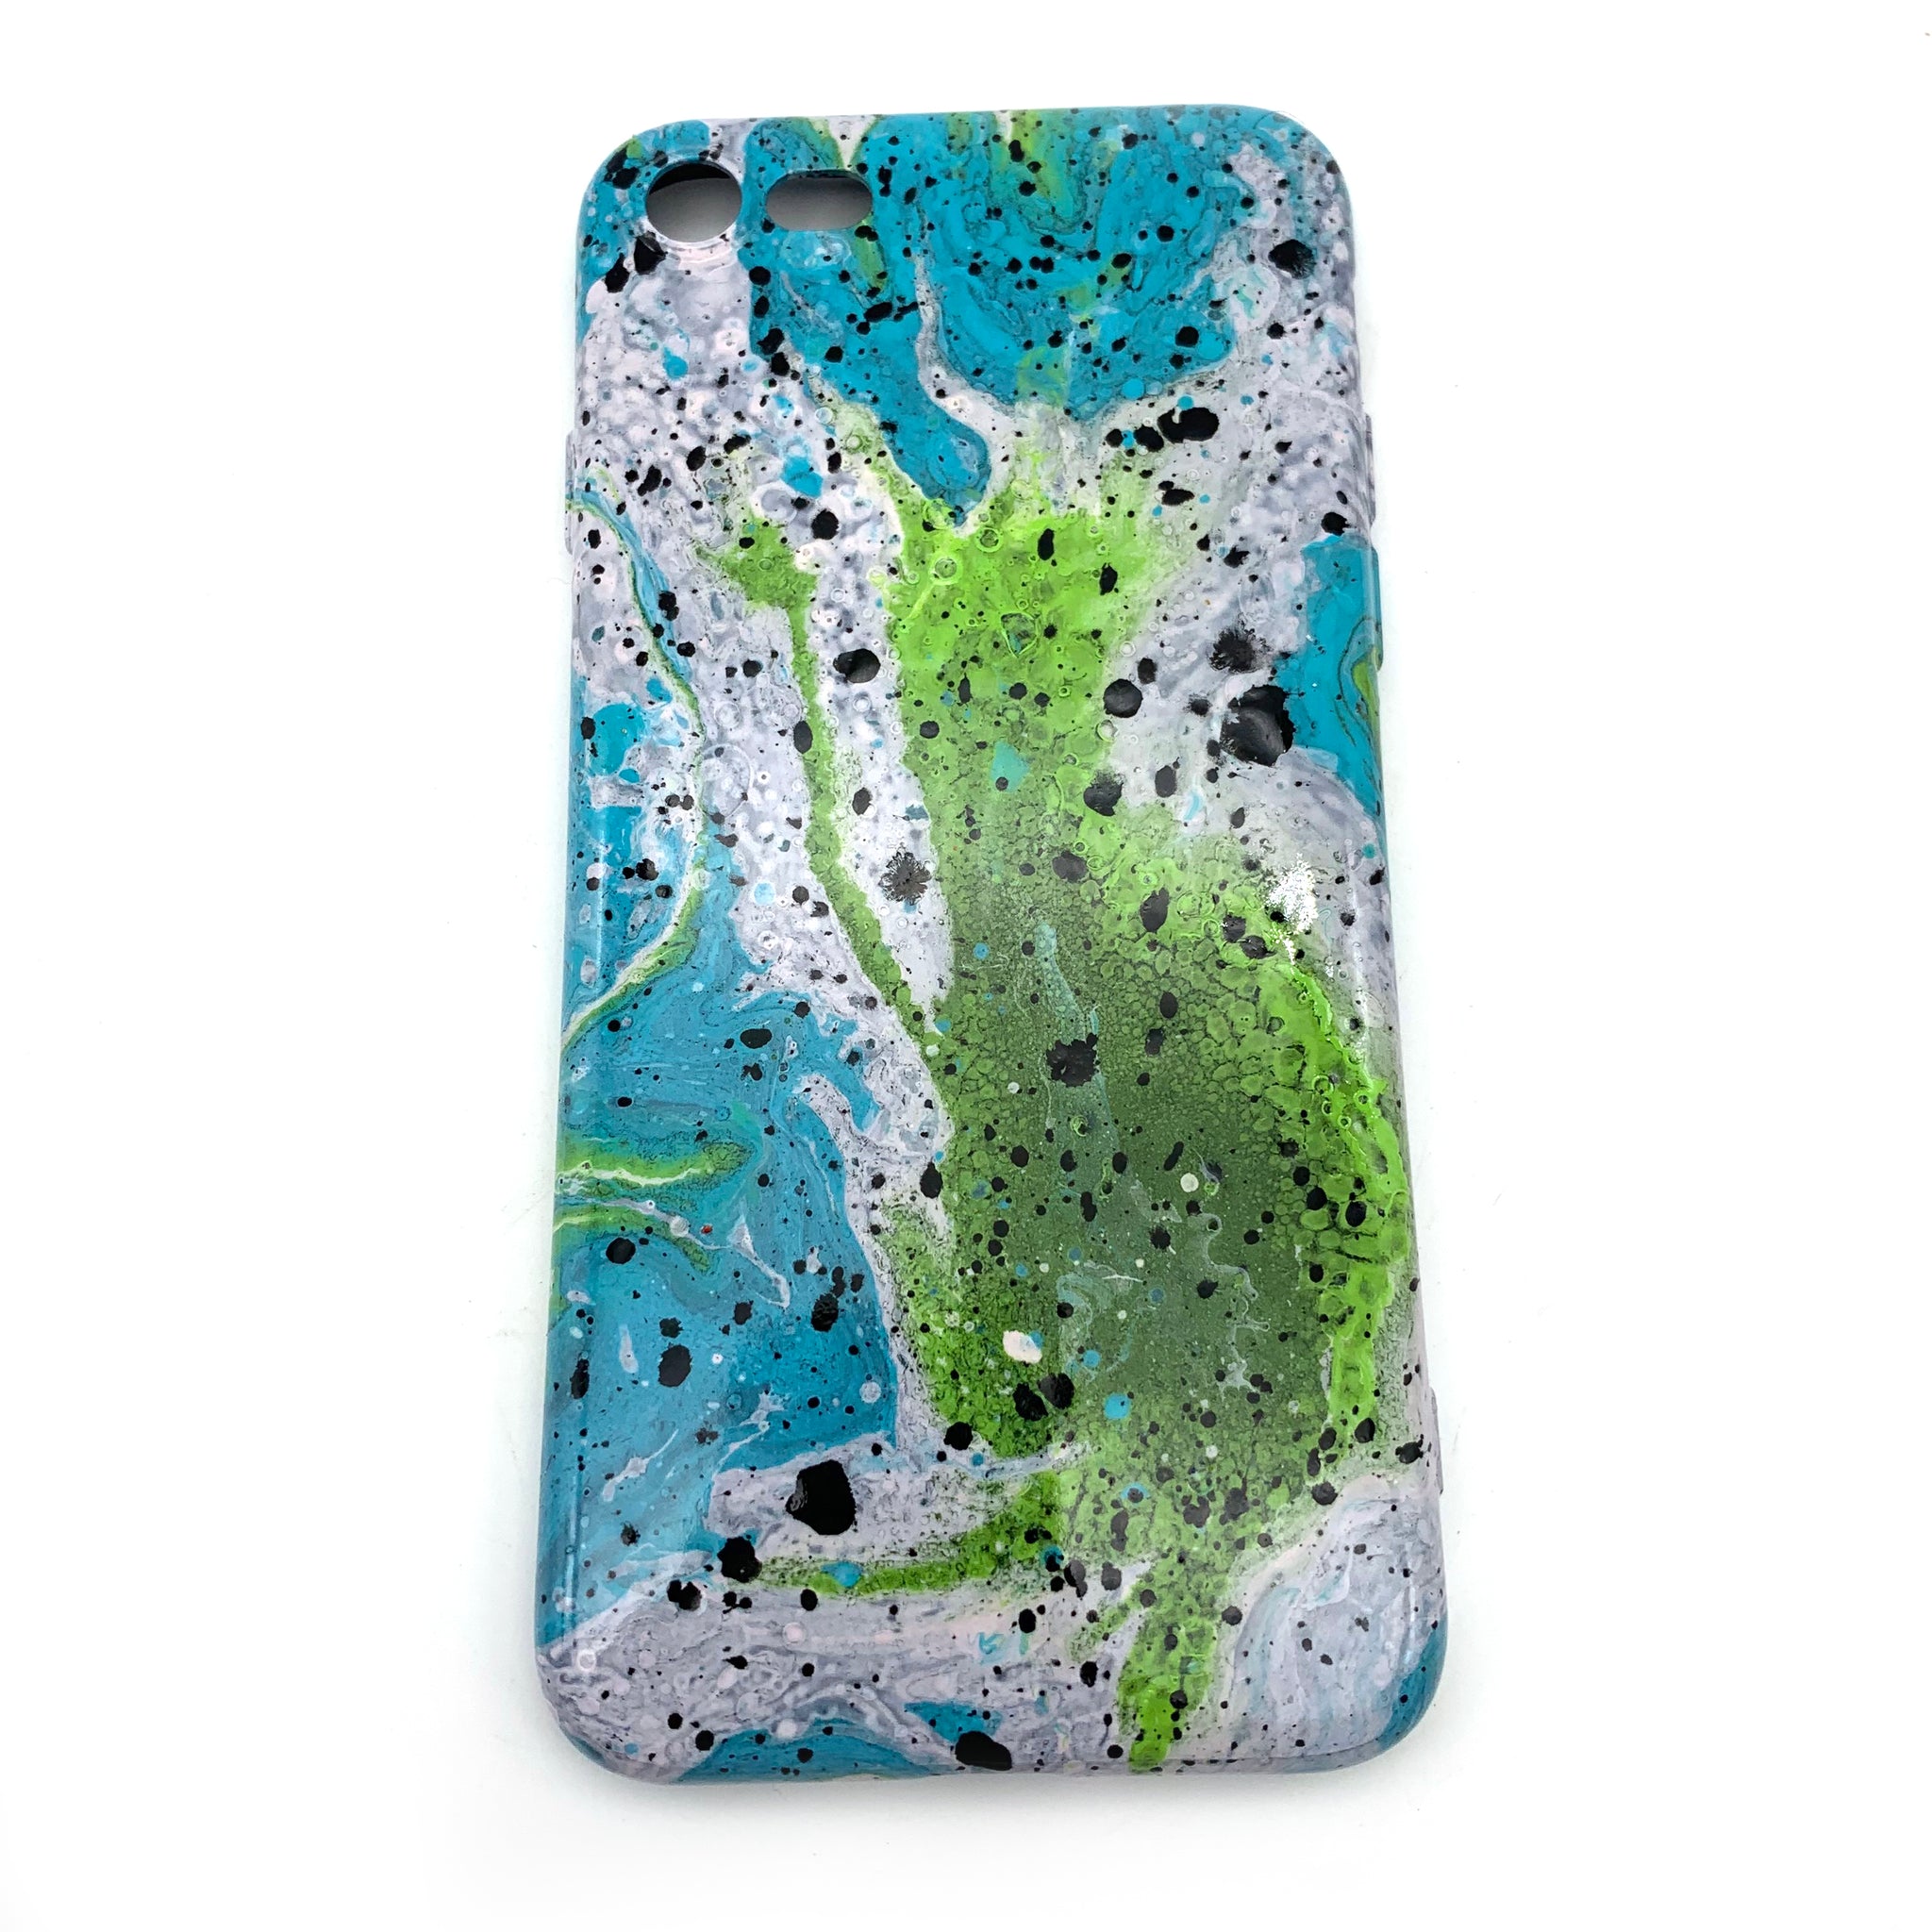 Hydro Dipped Phone Cases in Green Blue White and Black - iPhone 7, iPhone 8, iPhone SE (2020)